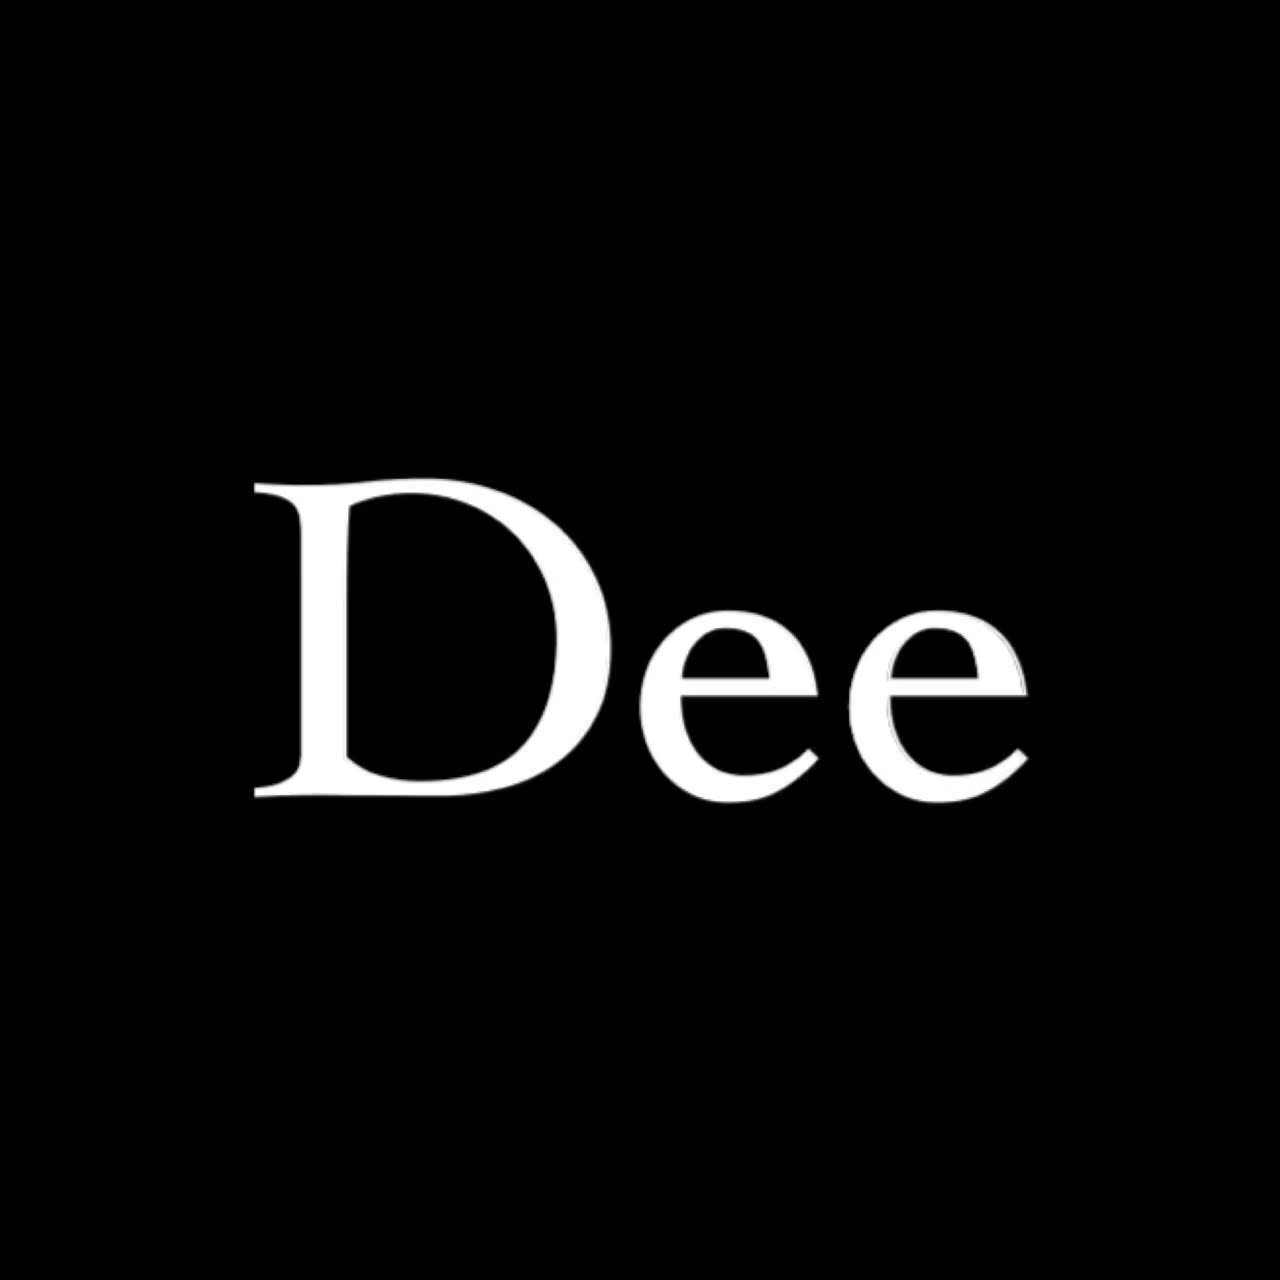 The Dee shop